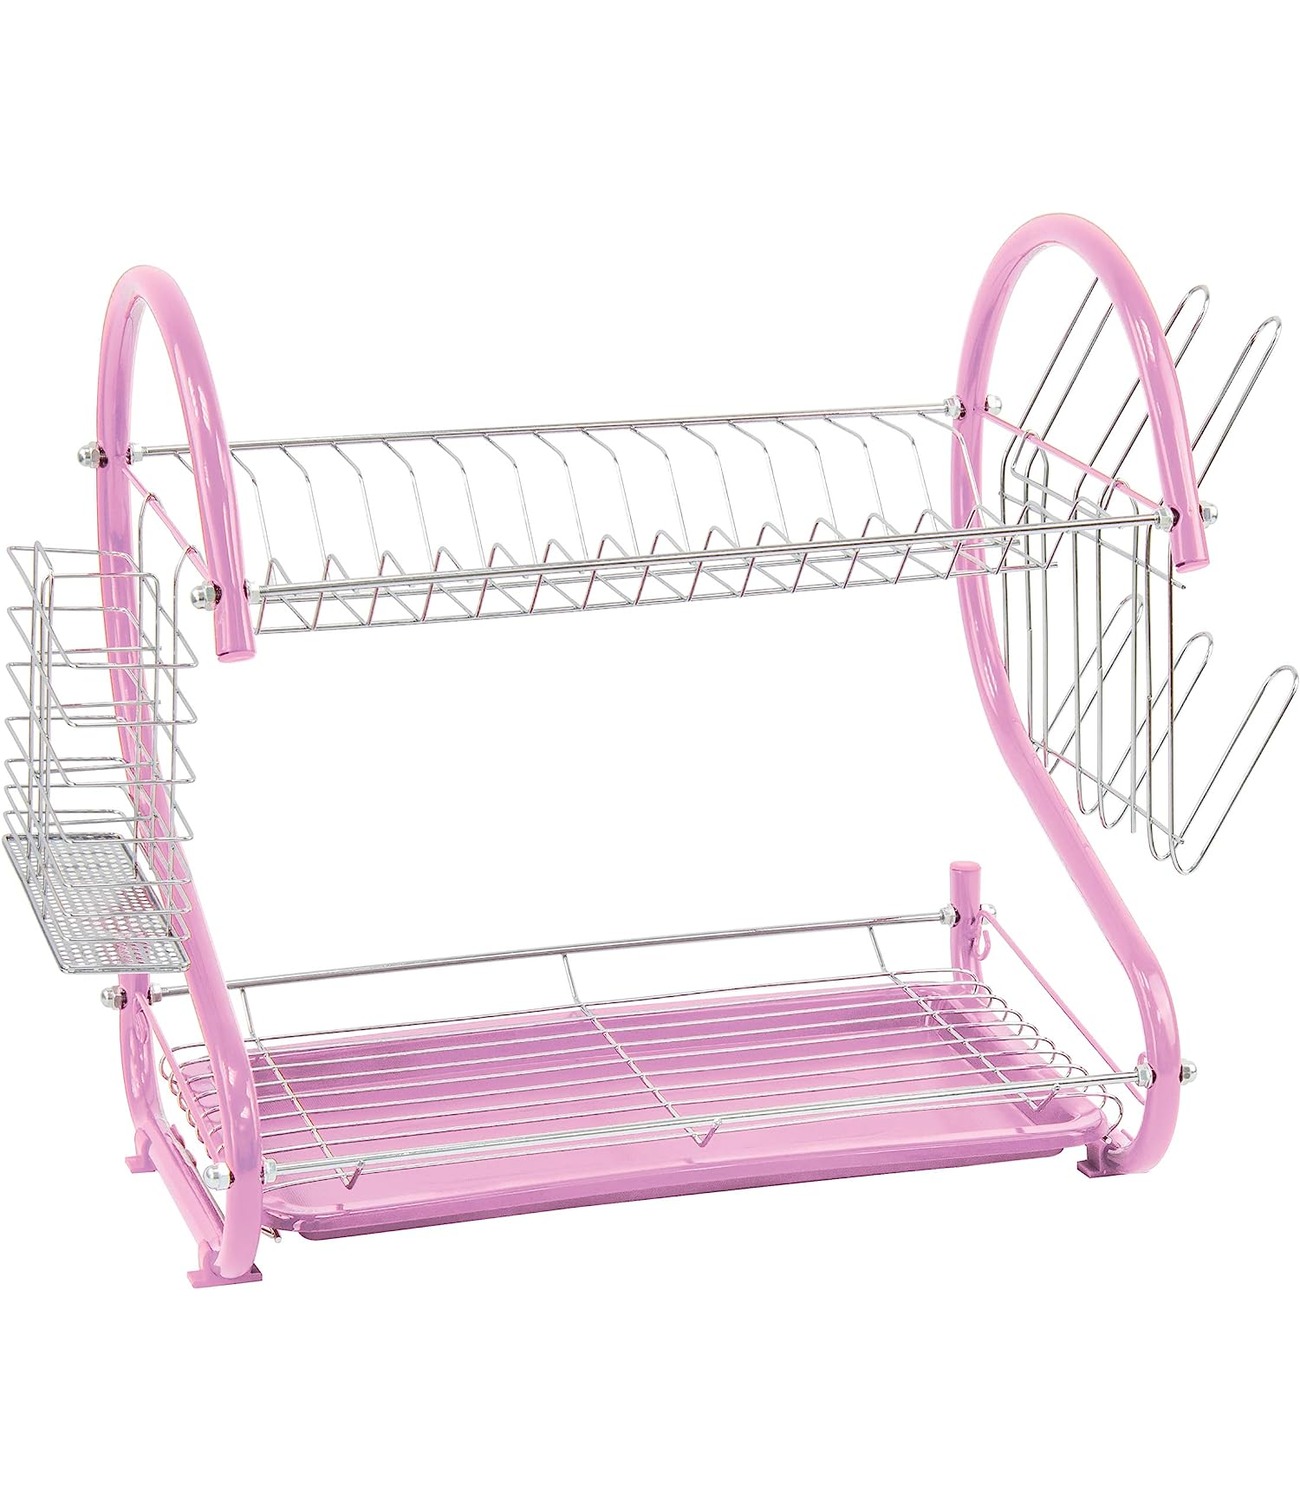 Durane 2 Tier Dish Drainer With Glass Holder & Drip Tray (Pink)